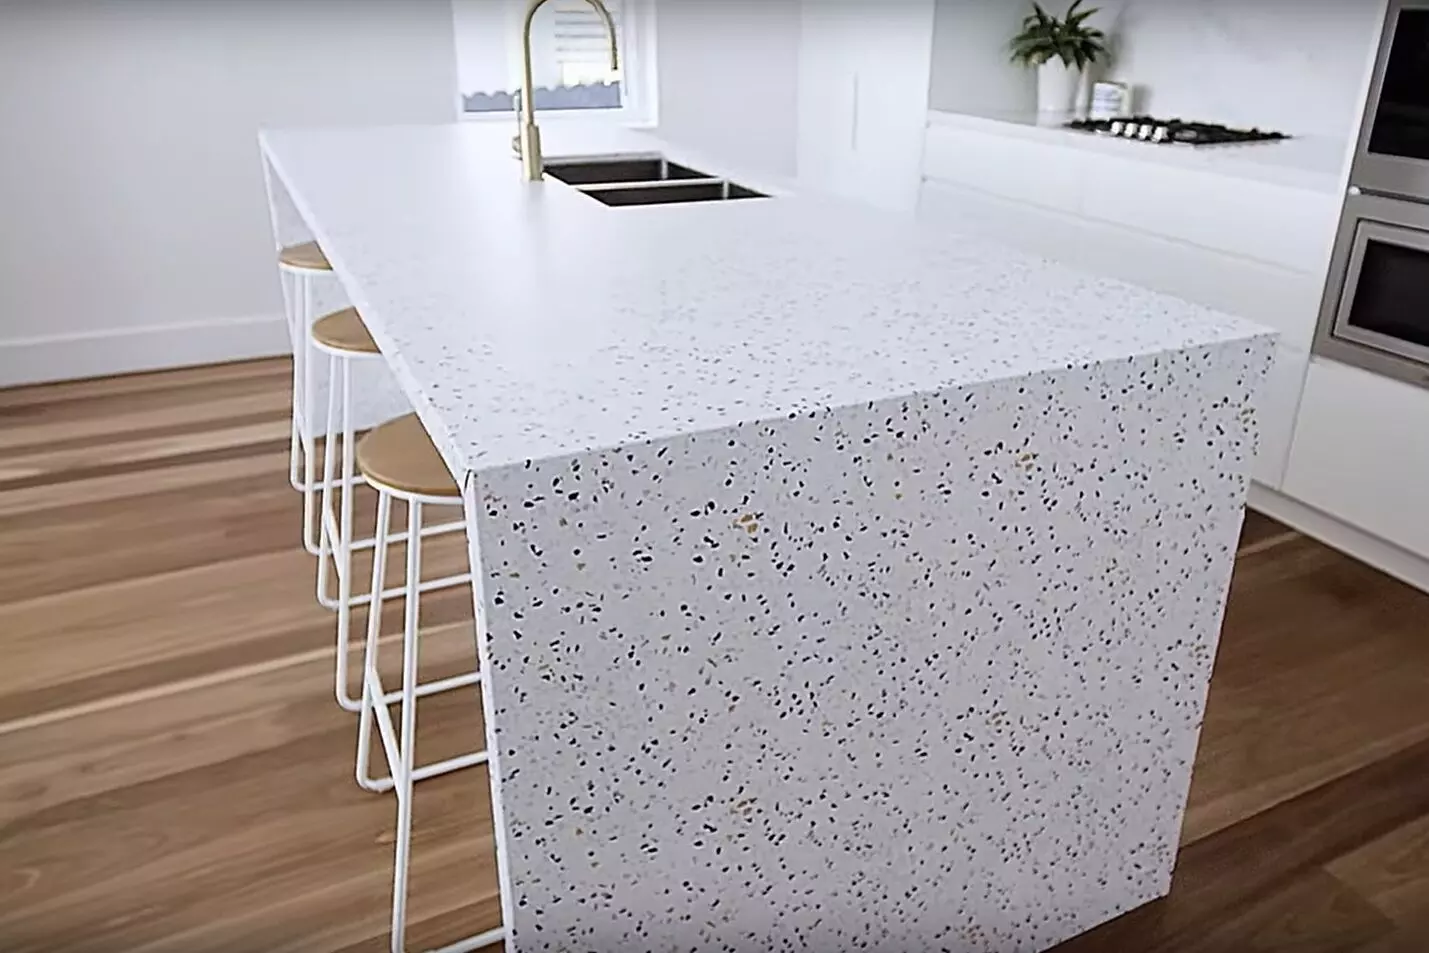 Australia first country in world to ban engineered stone